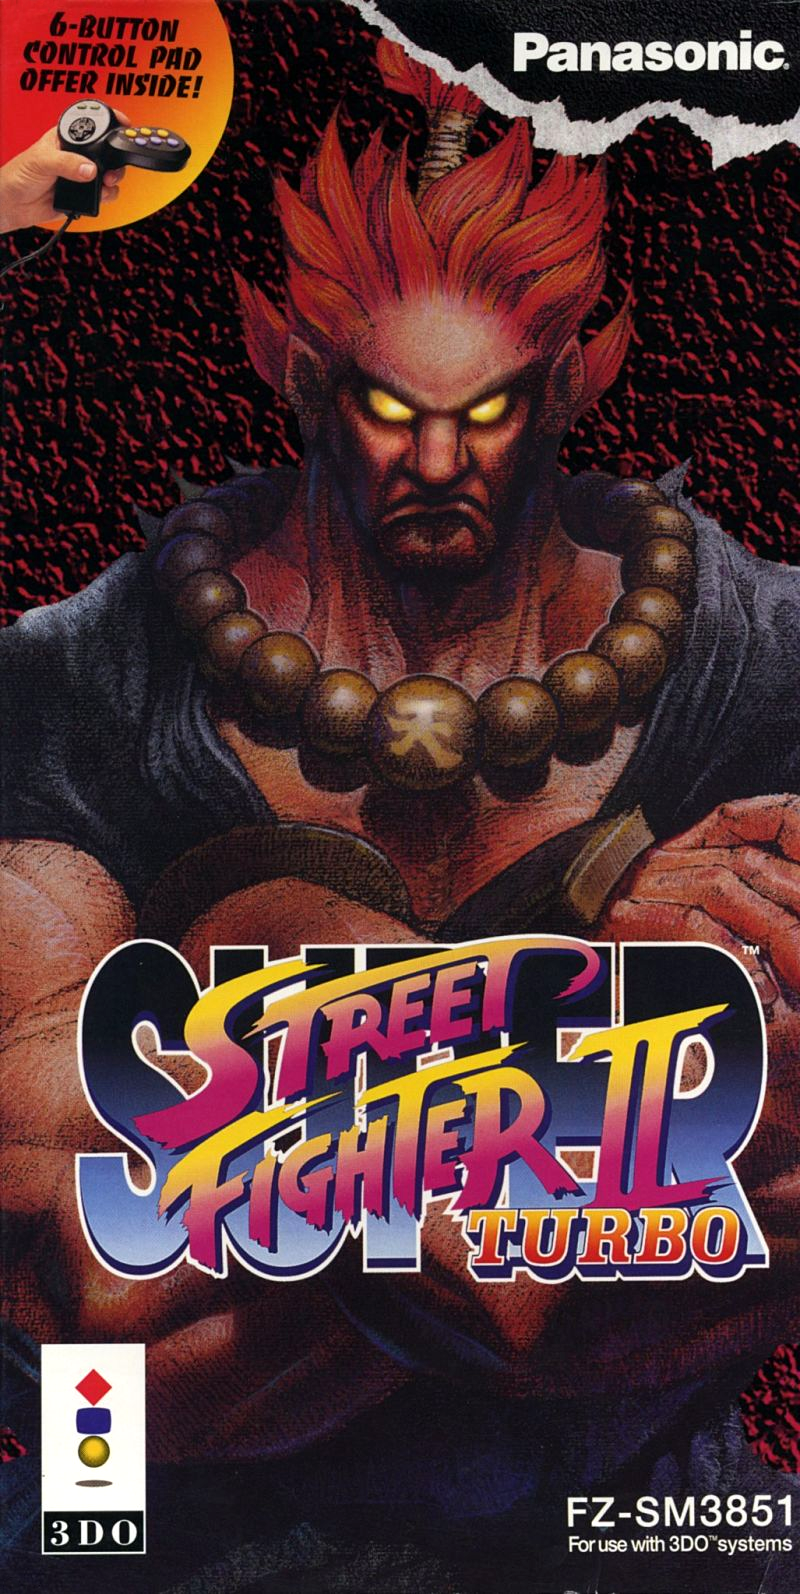 Super Street Fighter II Turbo - Arcade - Commands/Moves 